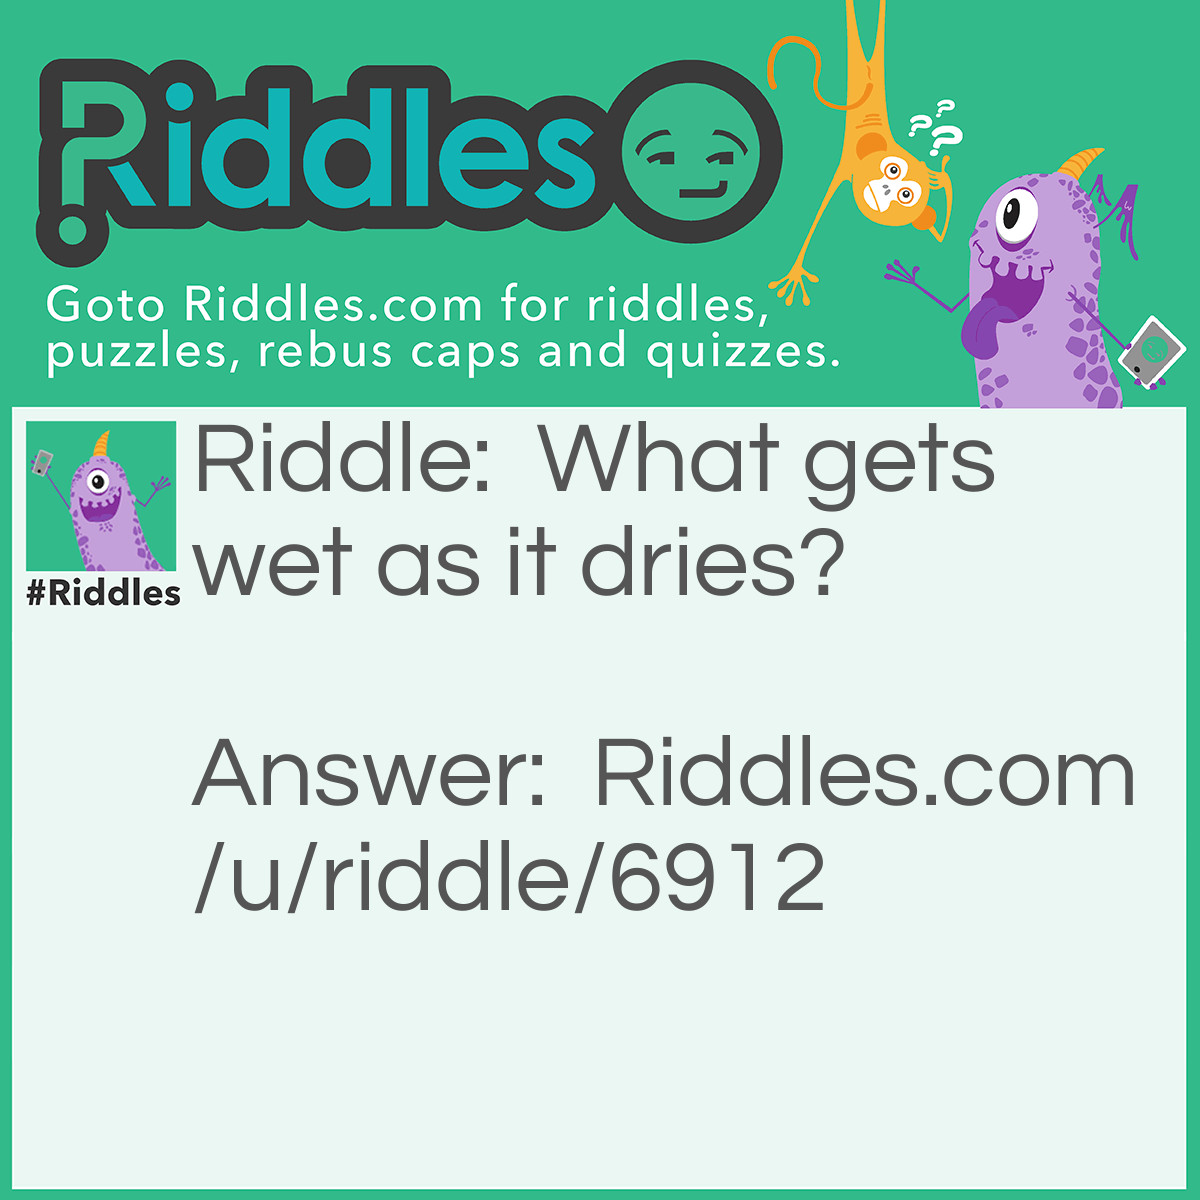 Riddle: What gets wet as it dries? Answer: A towel.